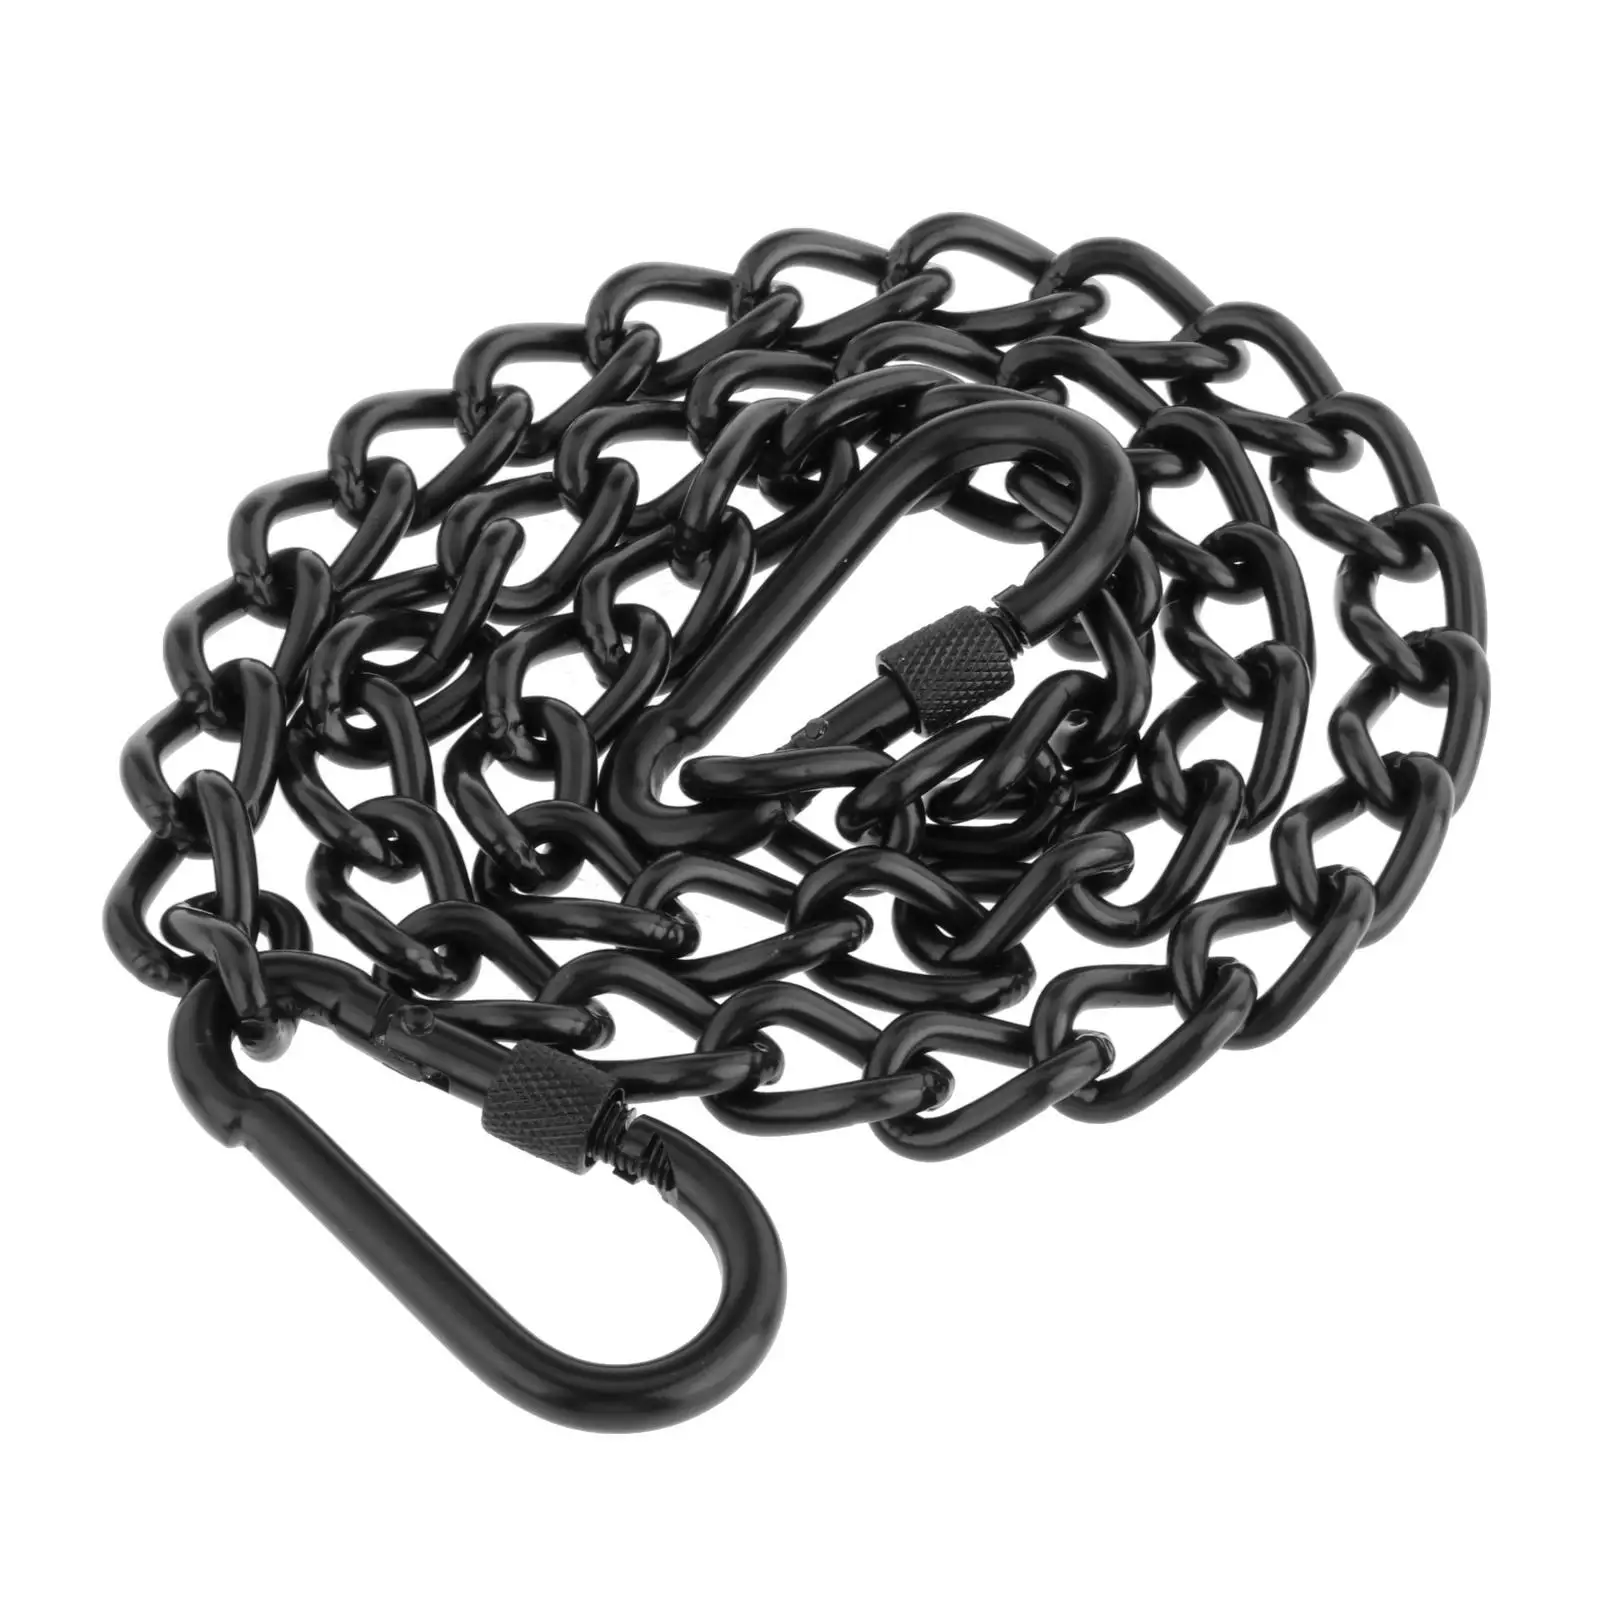 Hanging Chair Chain 200kg Capacity Strong Sturdy Snap-Link Hardware Hanger Hooks for Hammock Punching Bag Home Gym Indoor Tire